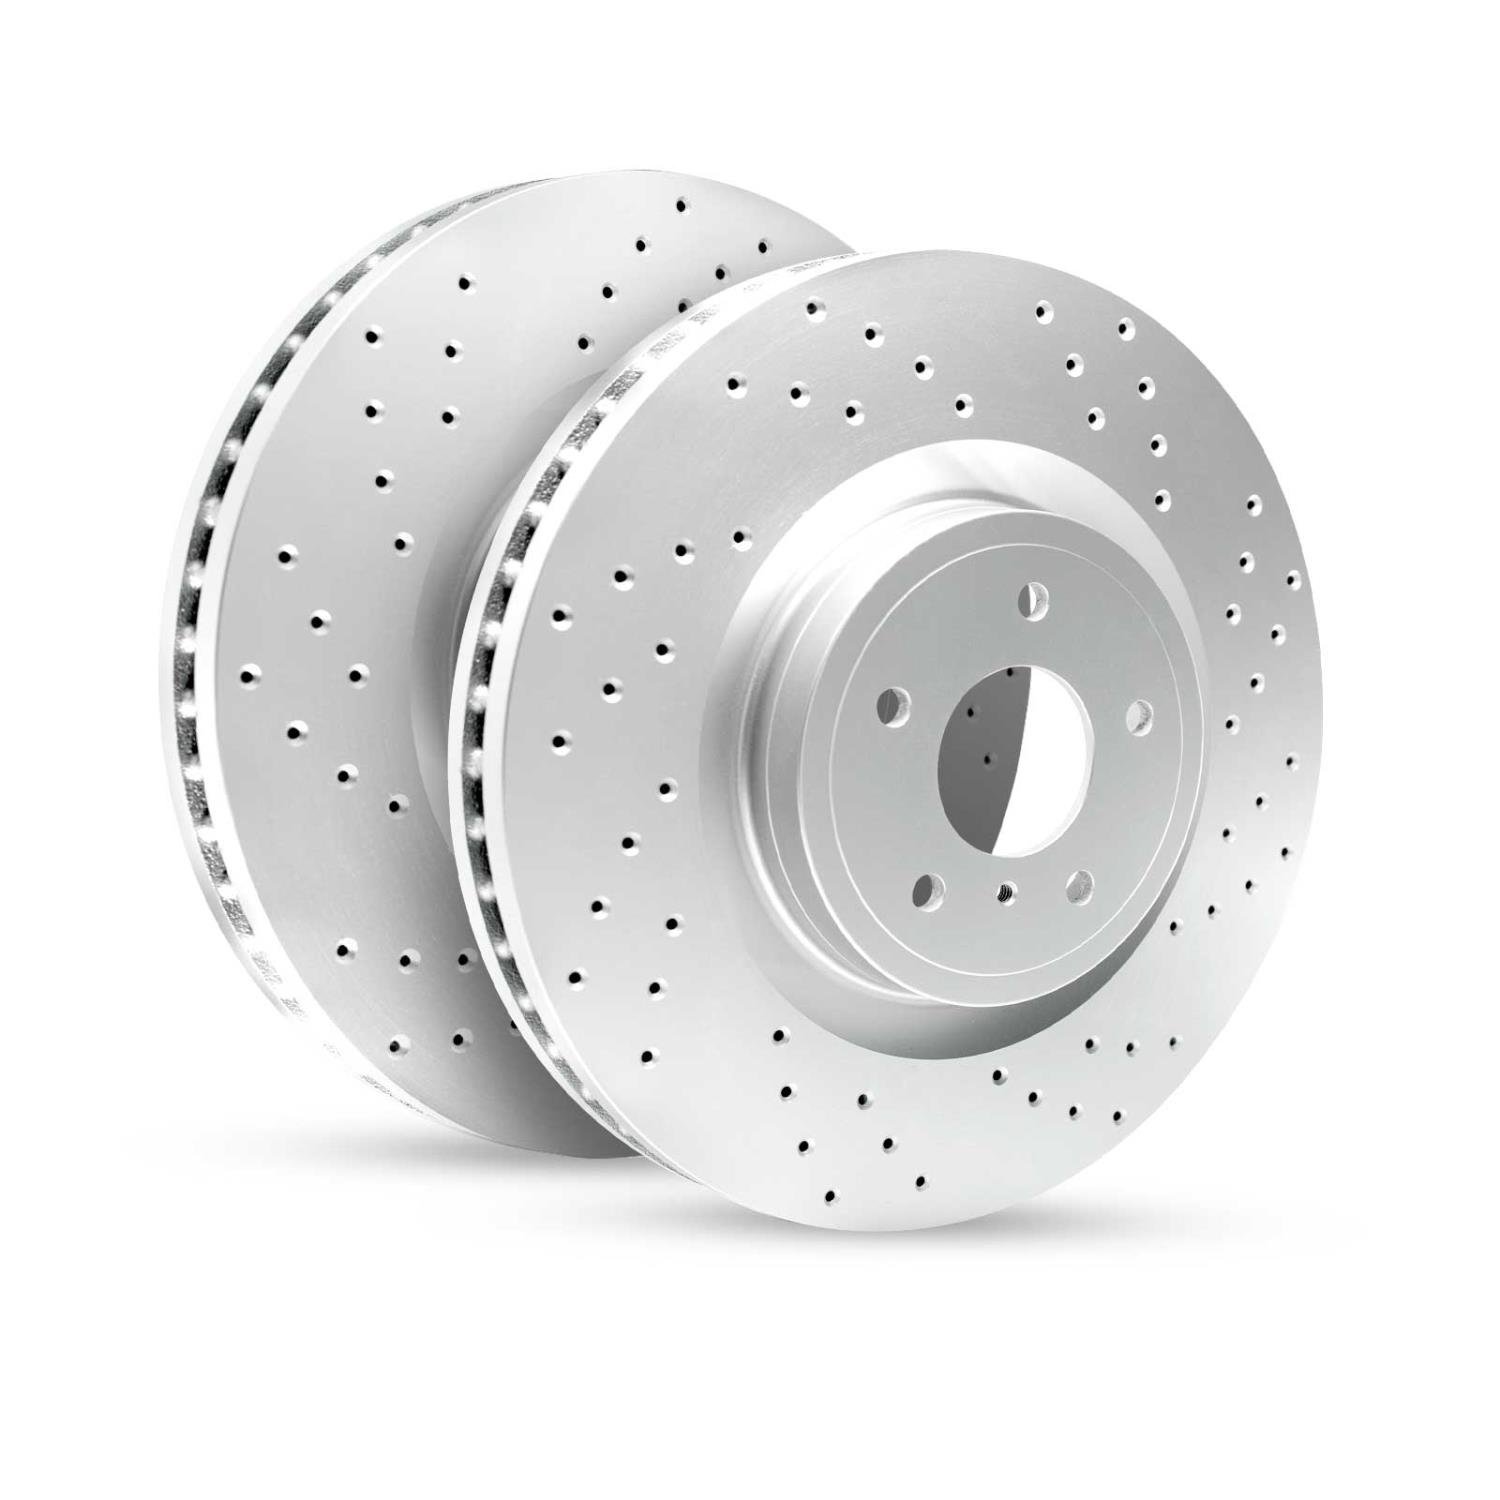 GEO-Carbon Drilled/Slotted Rotors, 2000-2005 Lexus/Toyota/Scion, Position: Rear